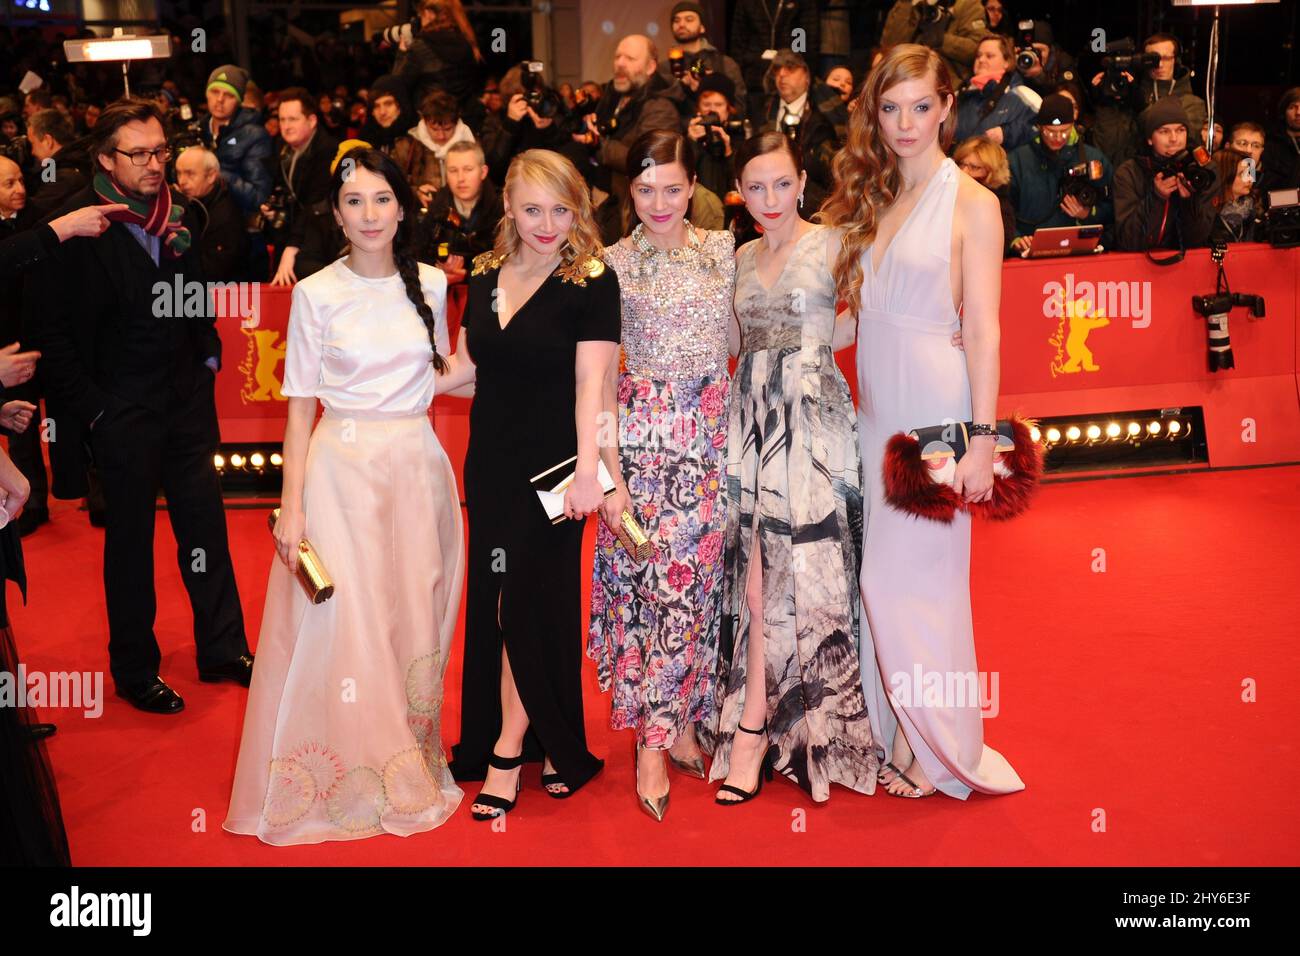 Sibel Kekilli, Hannah Herzsprung, Katharina Schuettler attending the Nobody Wants the Night premiere opening the 65th Berlinale, Berlin International Film Festival, in Berlin, Germany, February 5, 2015. Photo by Aurore Marechal/ABACAPRESS.COM Stock Photo